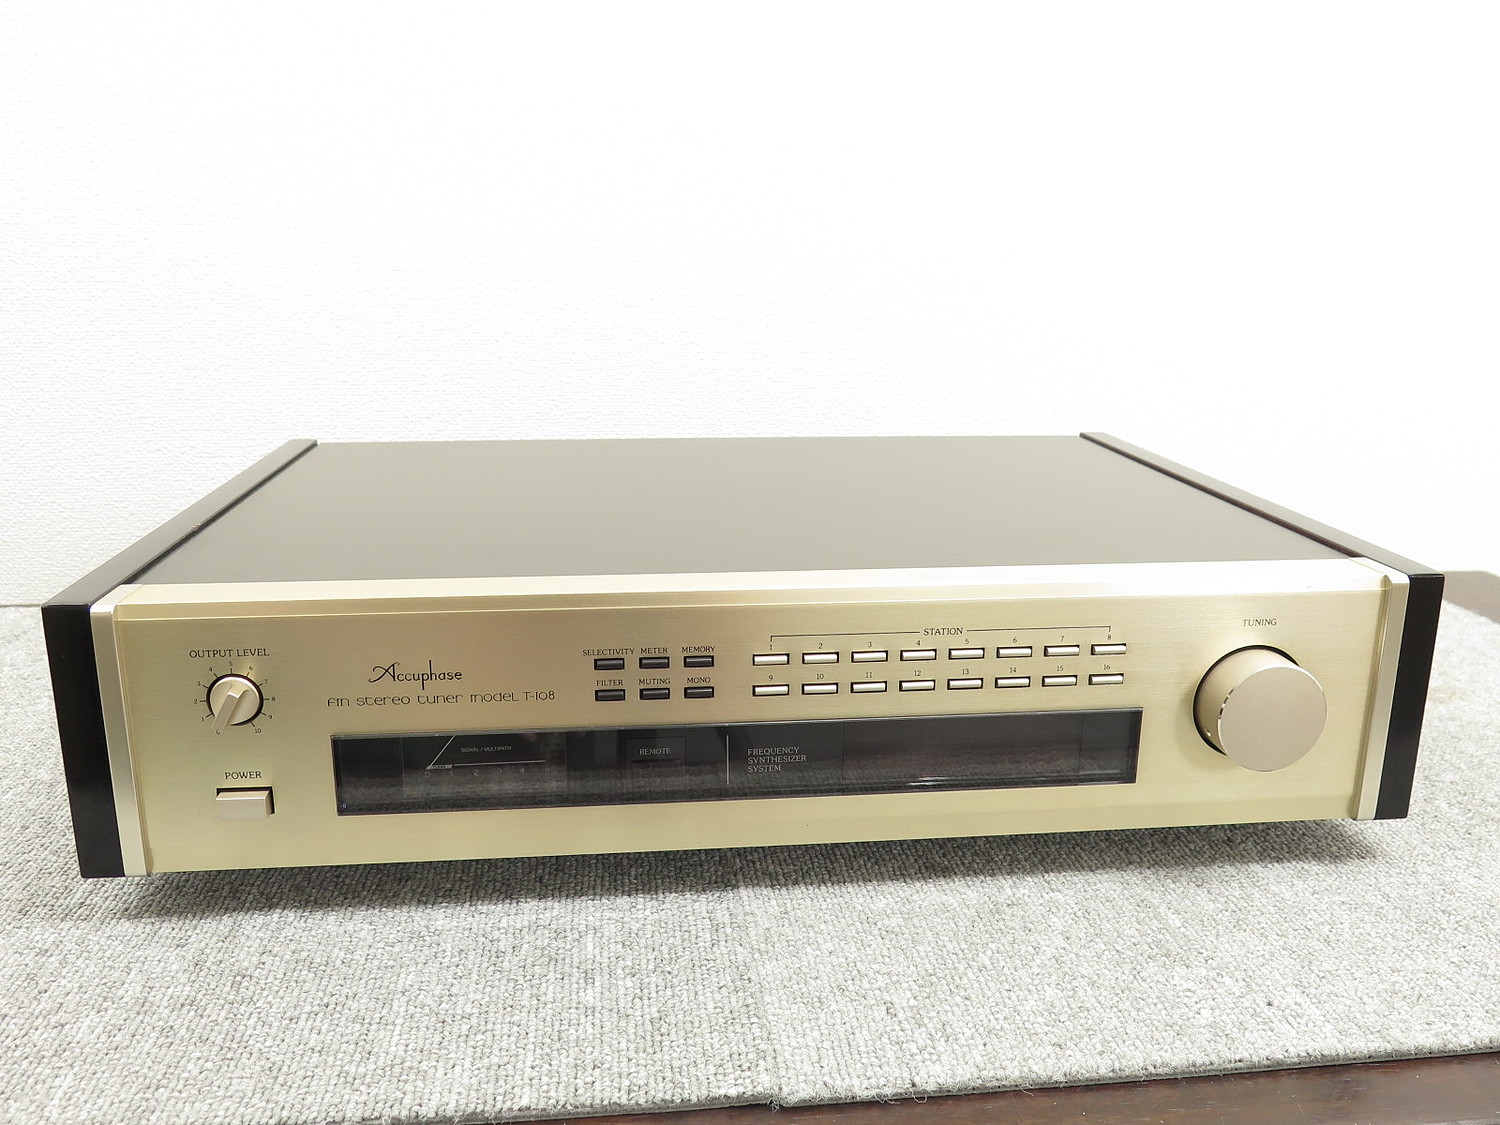 Aランクアキュフェーズ Accuphase T チューナー @ / 中古